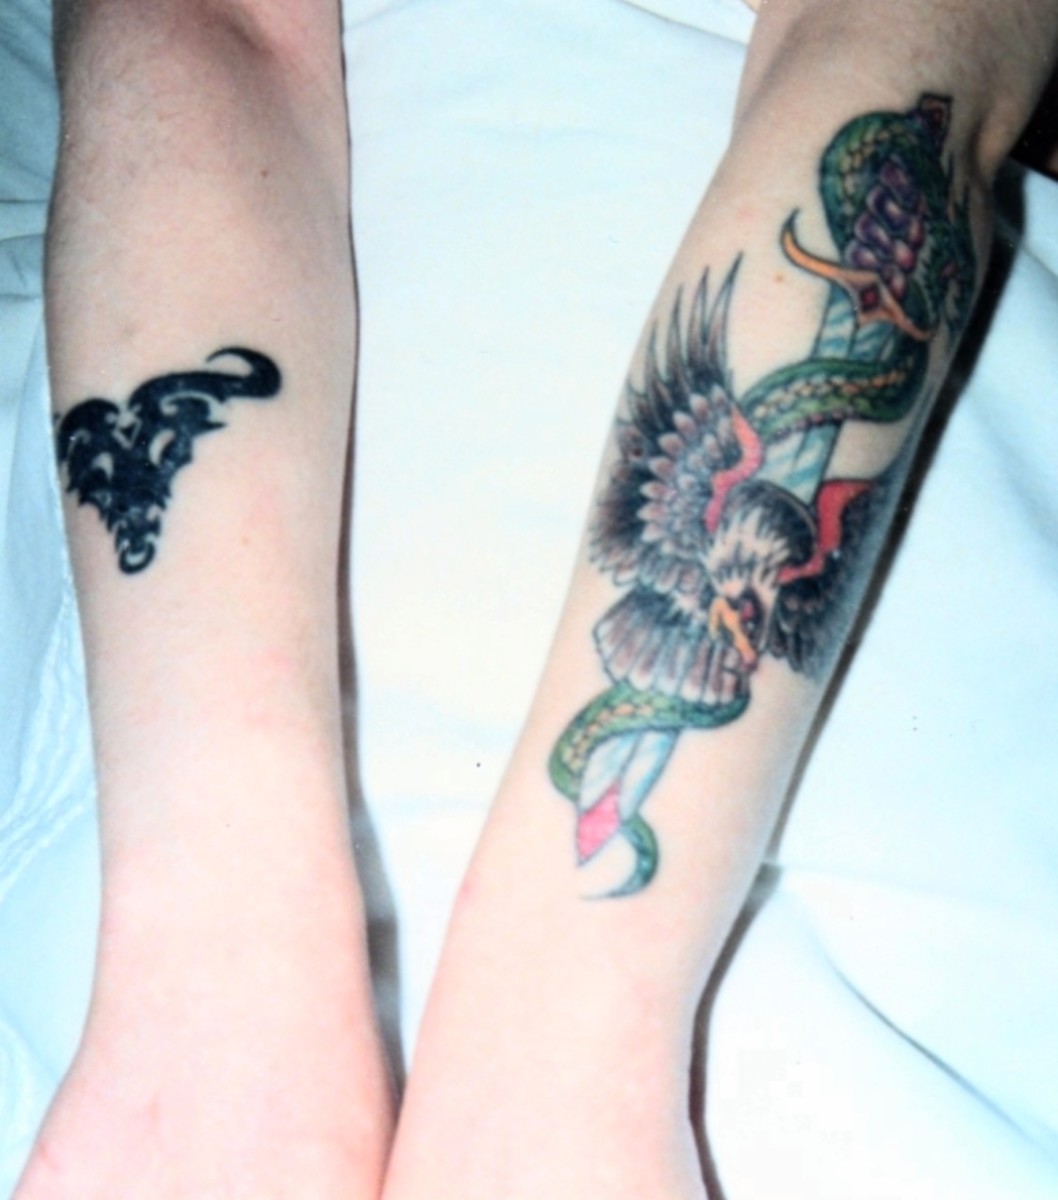 The finished tattooos